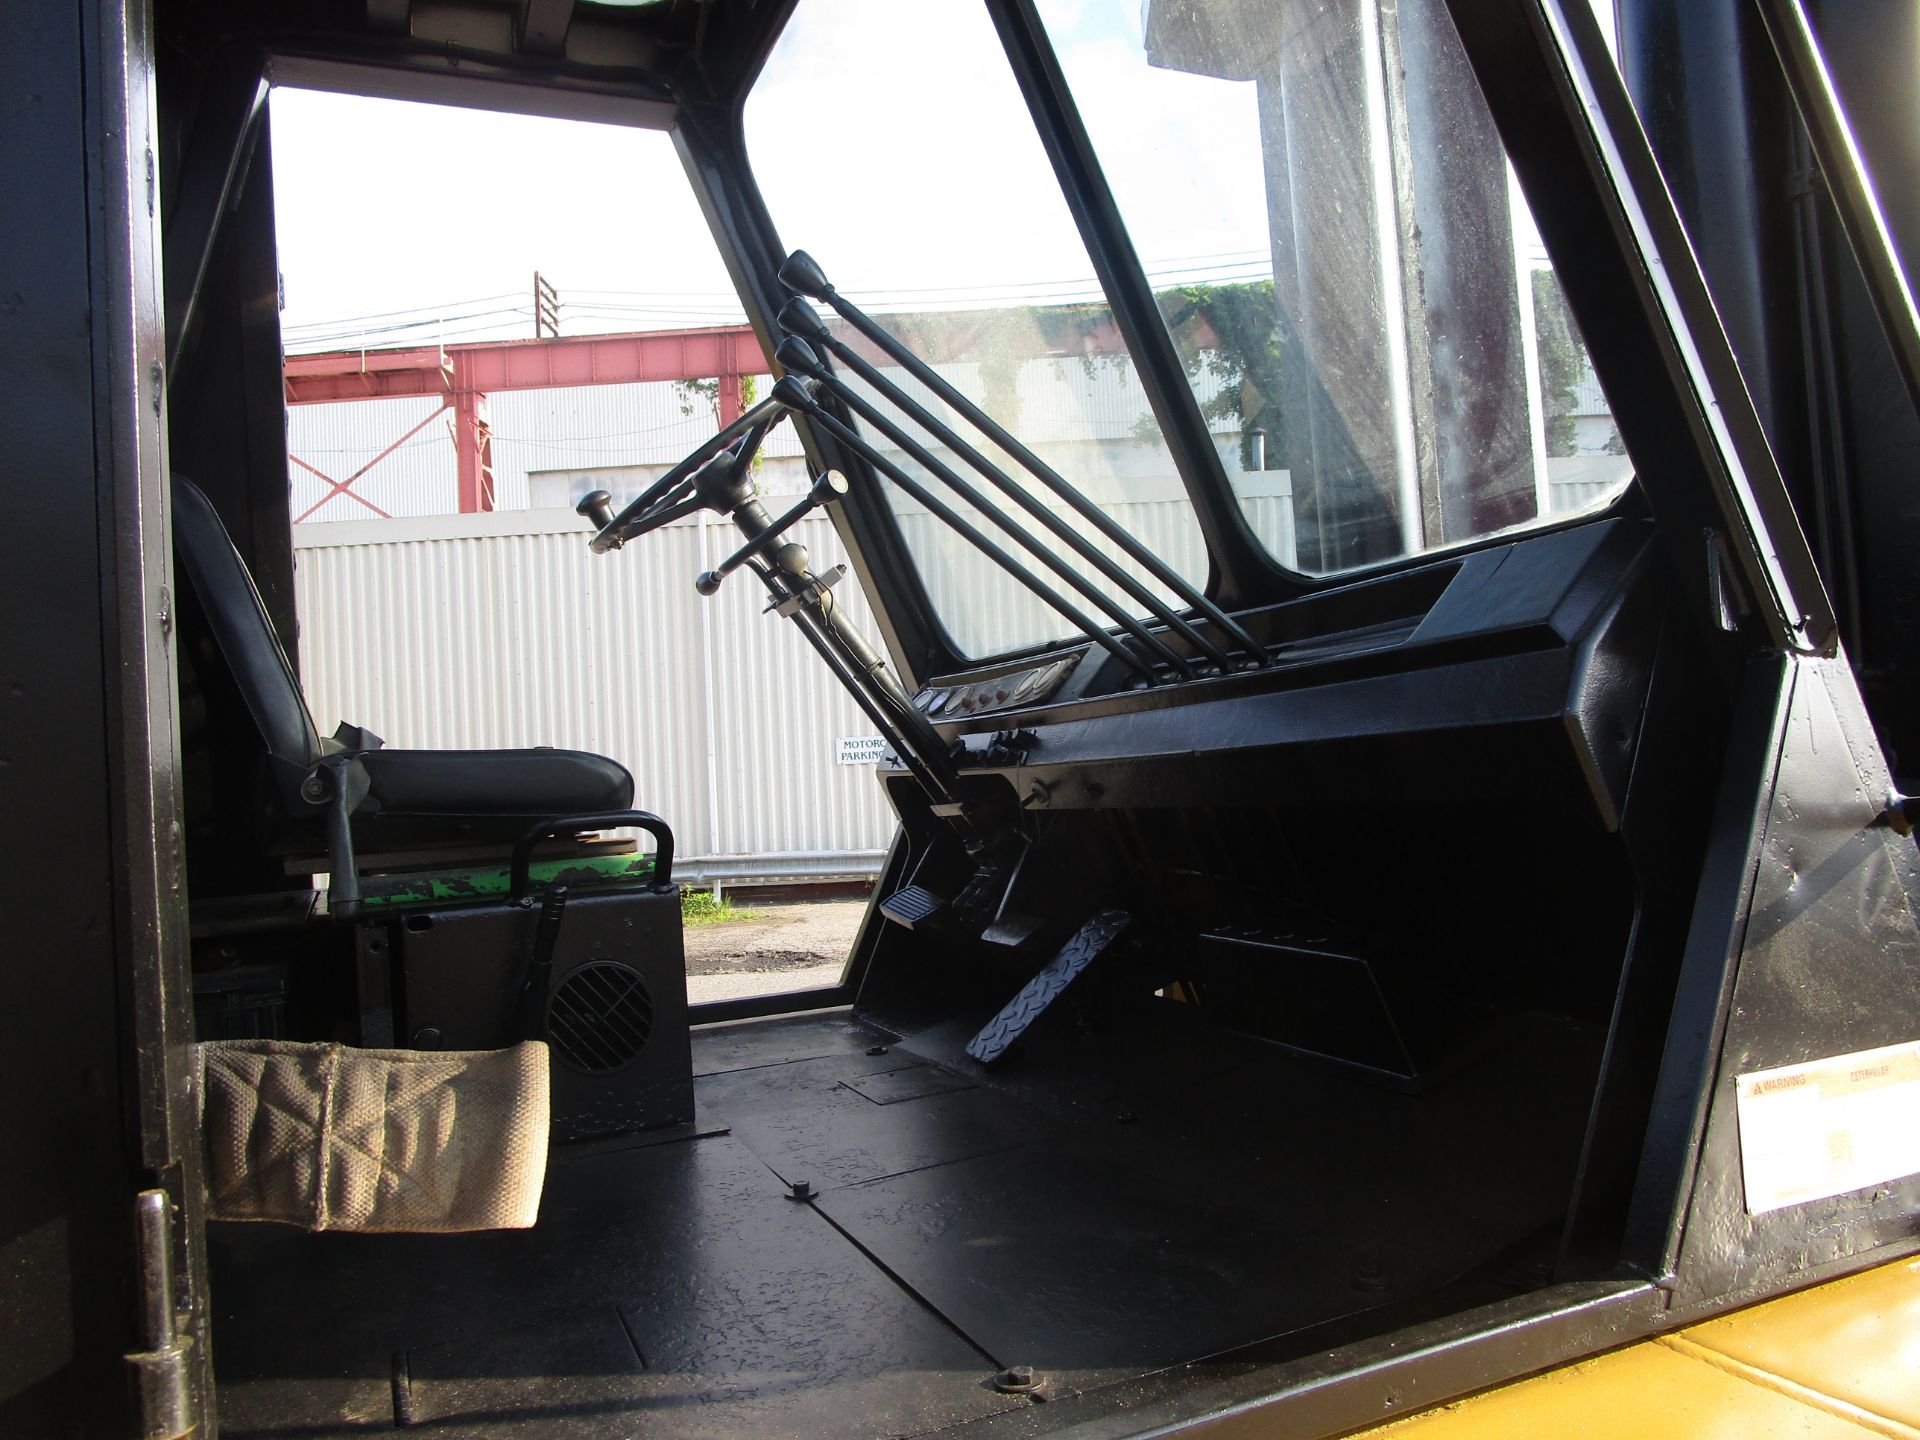 Caterpillar V250 25,000lb Forklift - Located in Lester, PA - Image 7 of 9